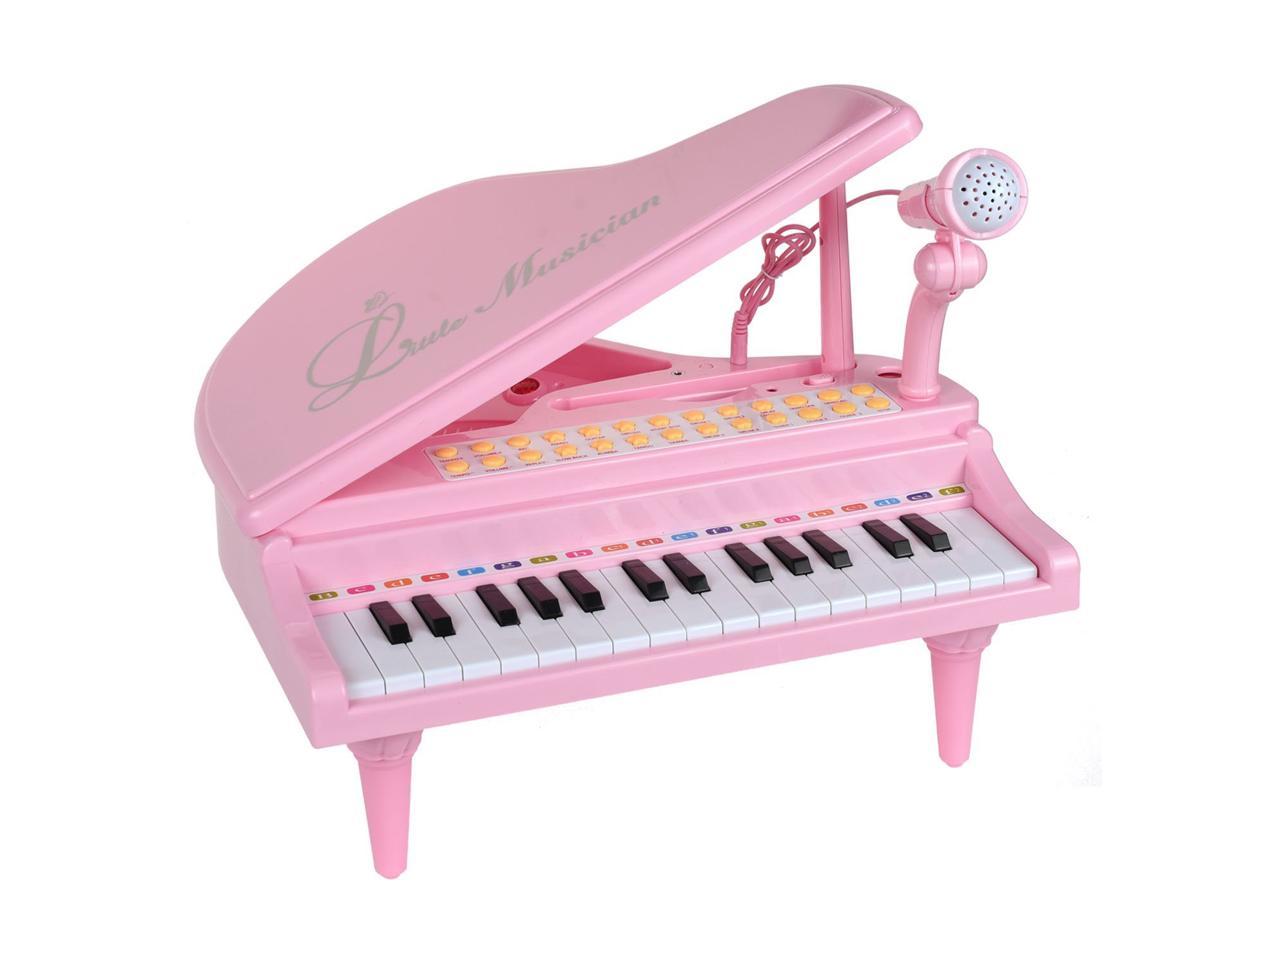 Electronic Musical Multifunctional Instruments for Girl Toddlers Kids Musical Talent Development Pink 31 Keys Piano Keyboard Toy with Microphone Audio Link with Mobile IPad PC 